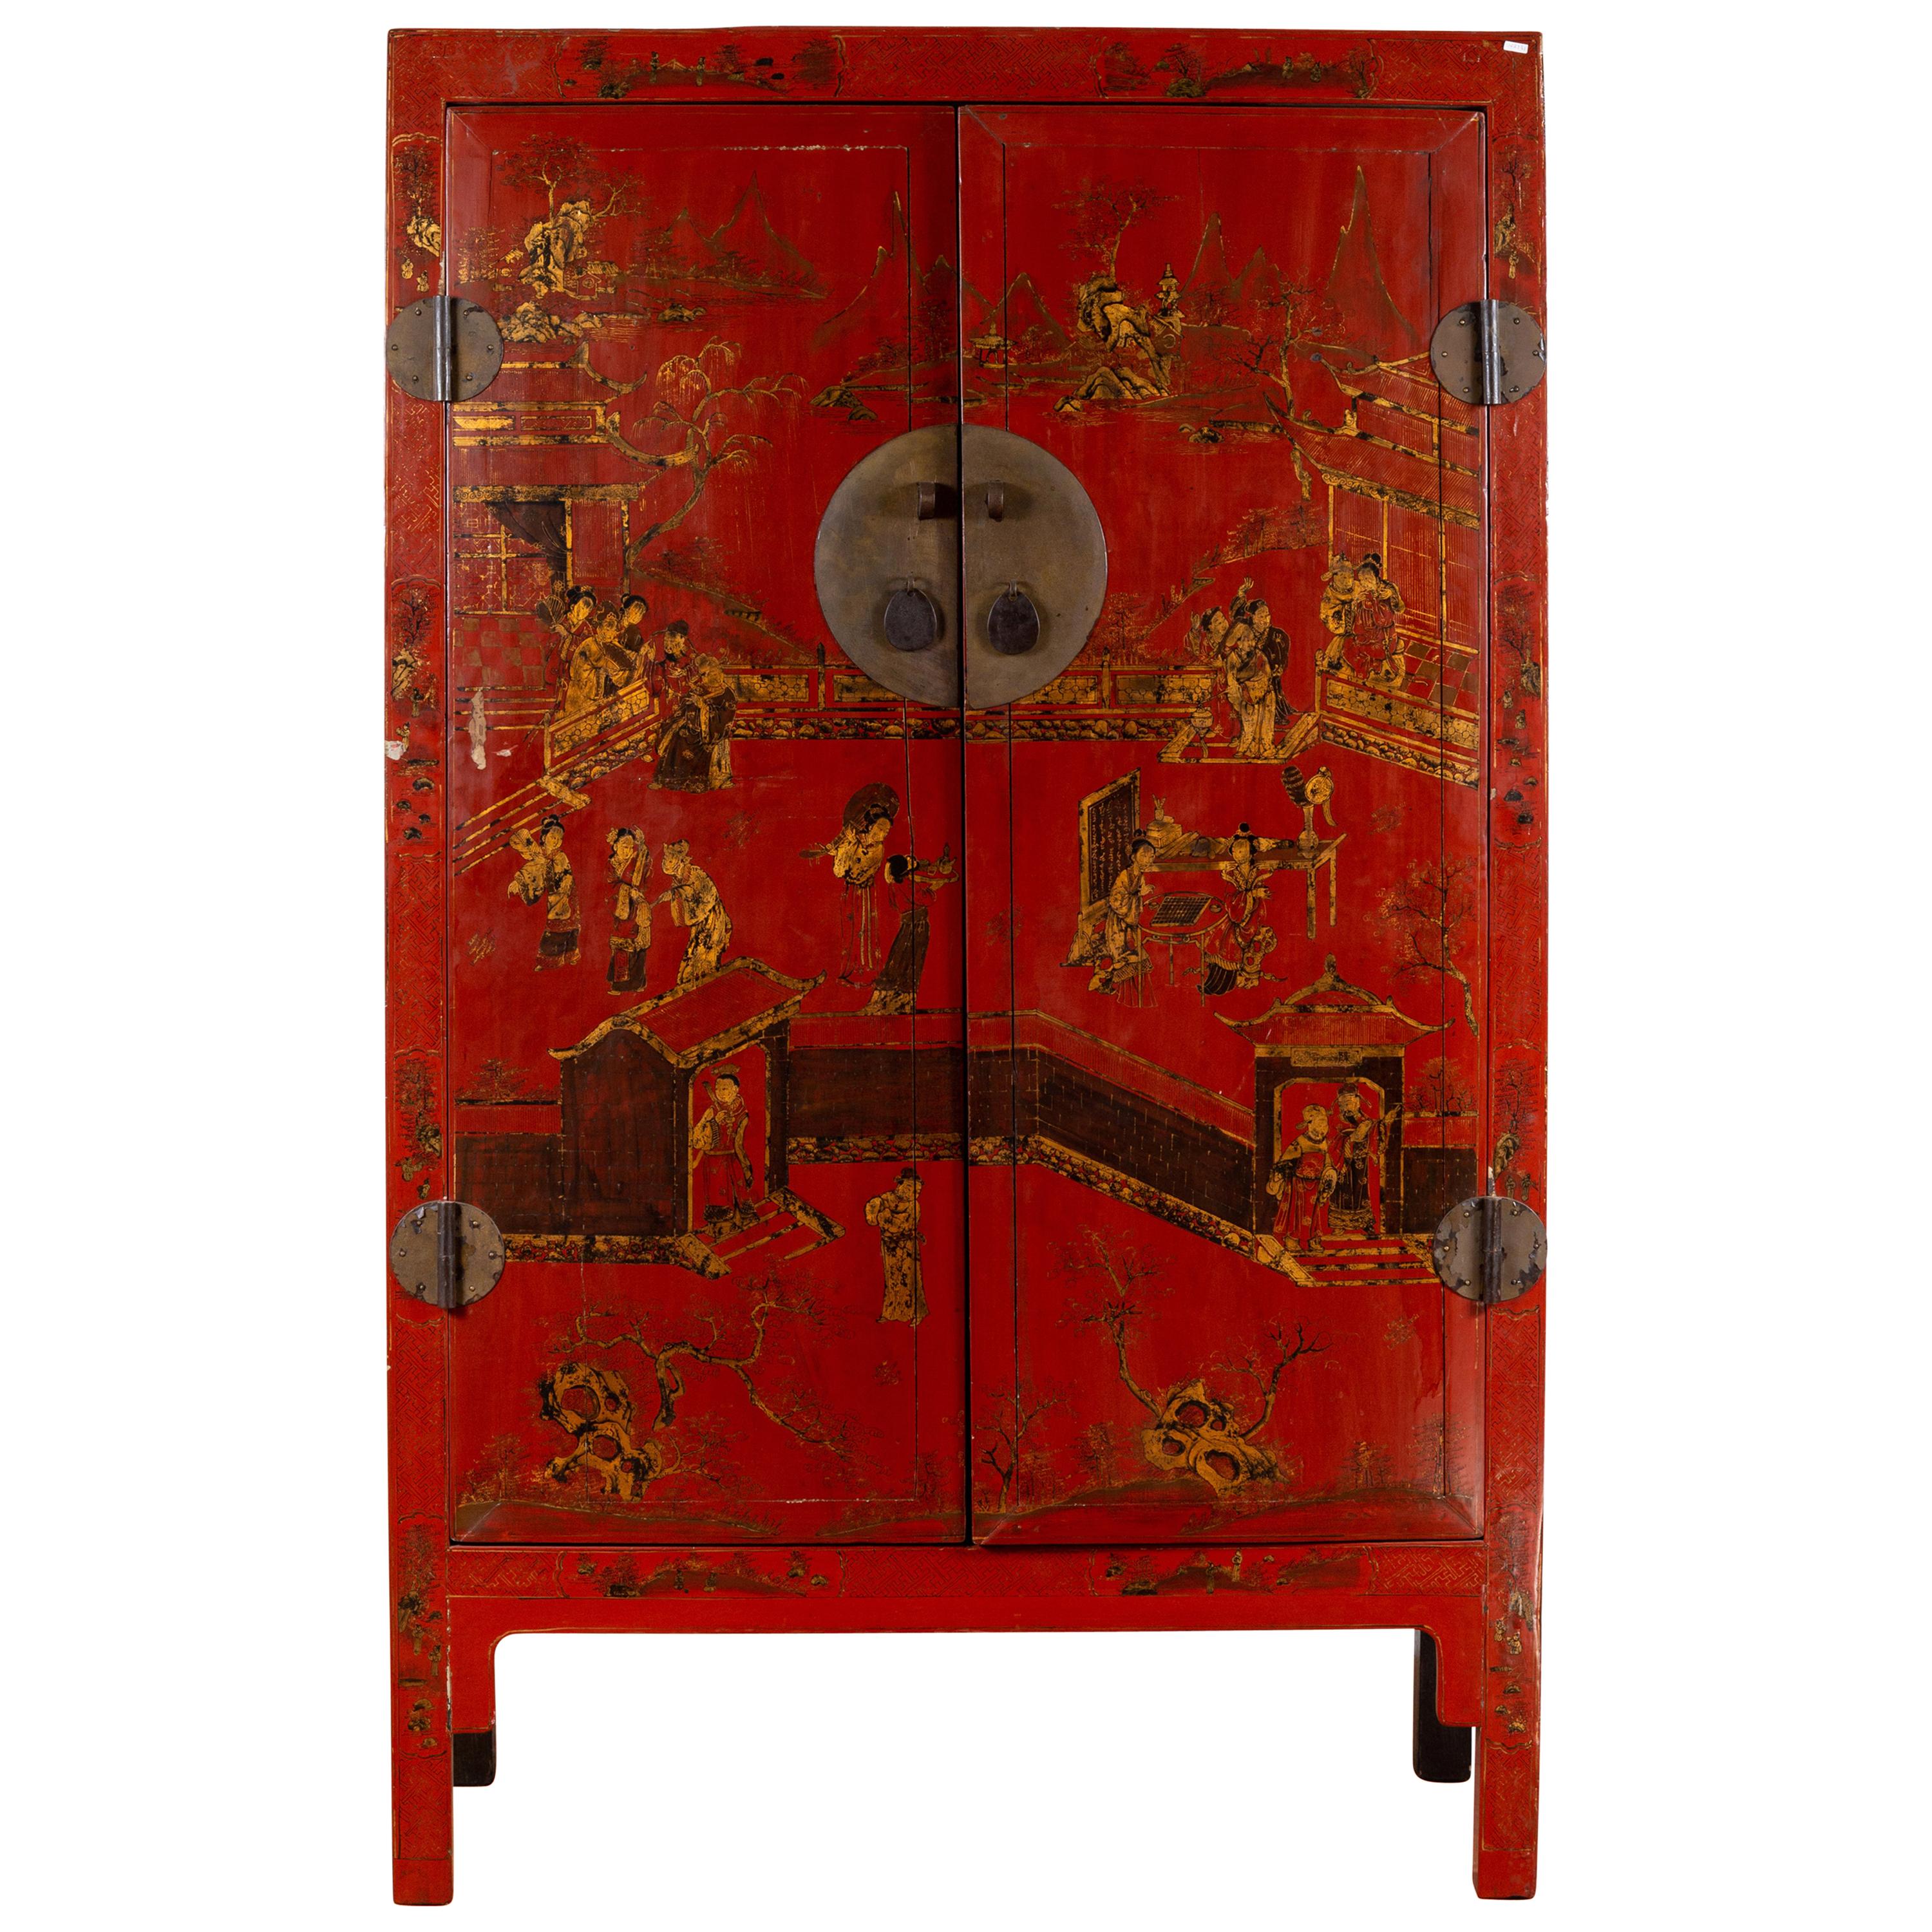 Chinese 19th Century Qing Dynasty Red Lacquered Cabinet with Chinoiserie Décor